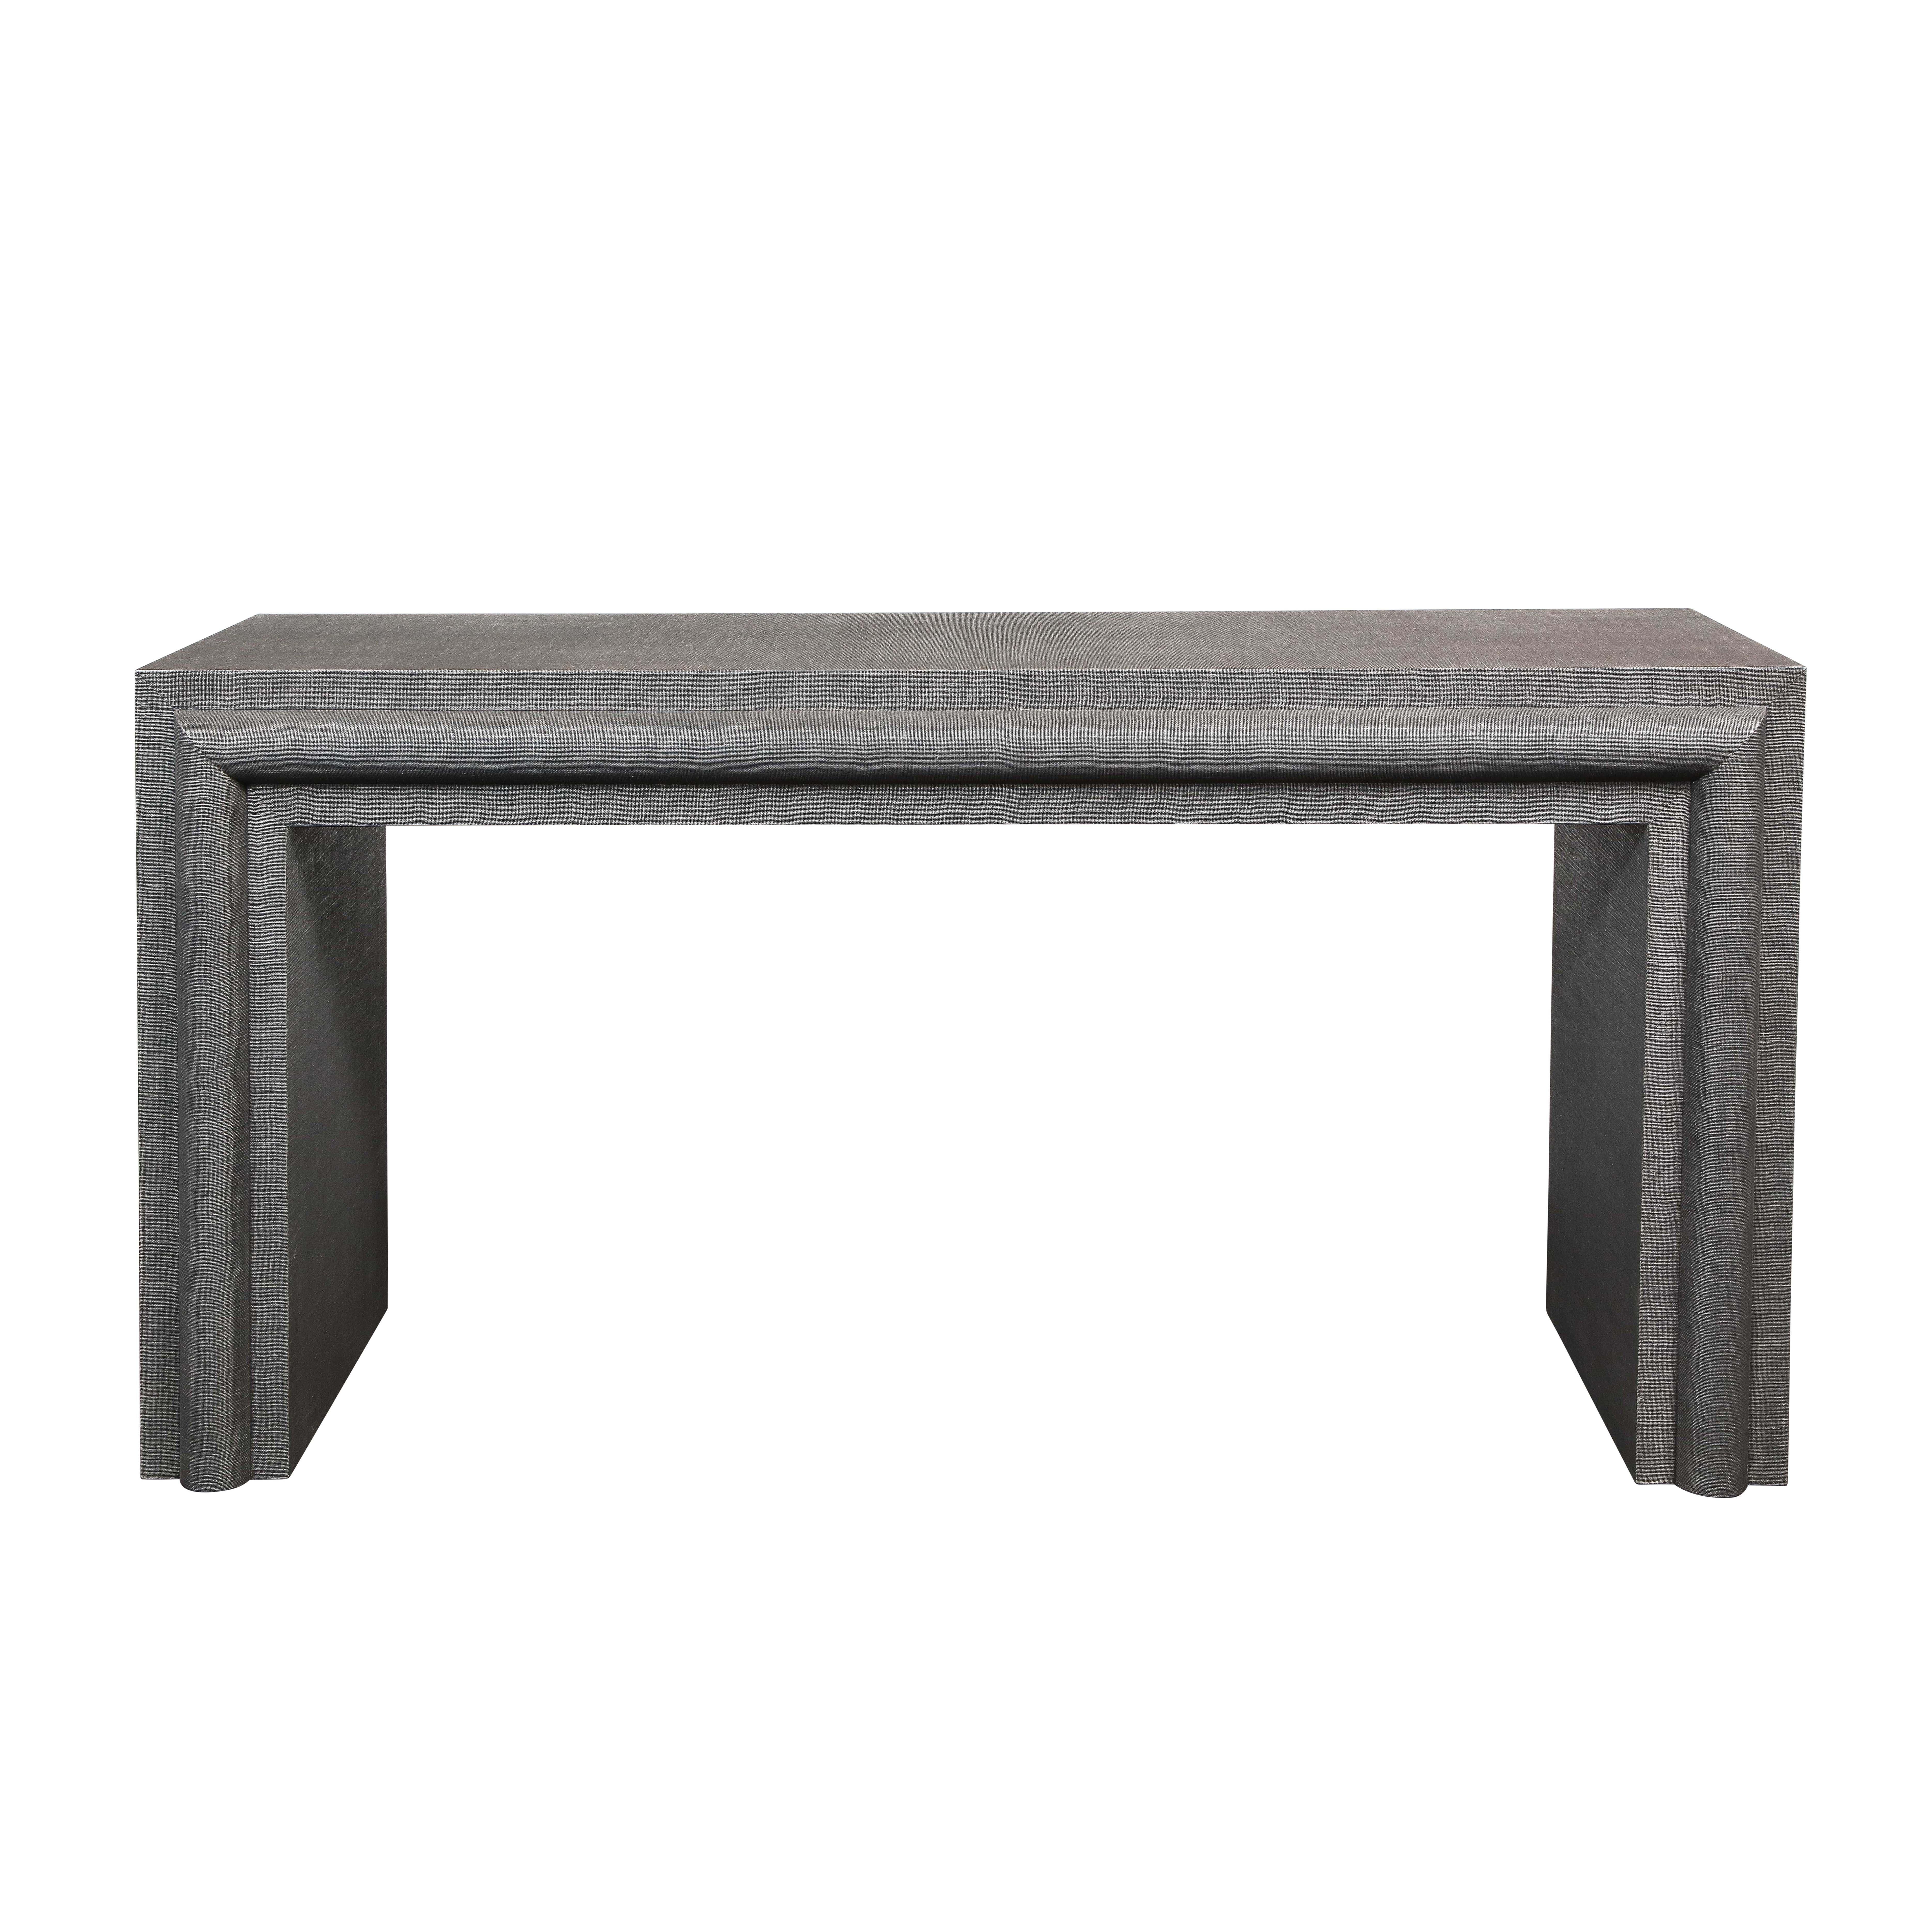 Stunning large console table with half round molding front edge, the entire piece covered in silver gray lacquered linen, custom design, American 1970's. This table is meticulously crafted.